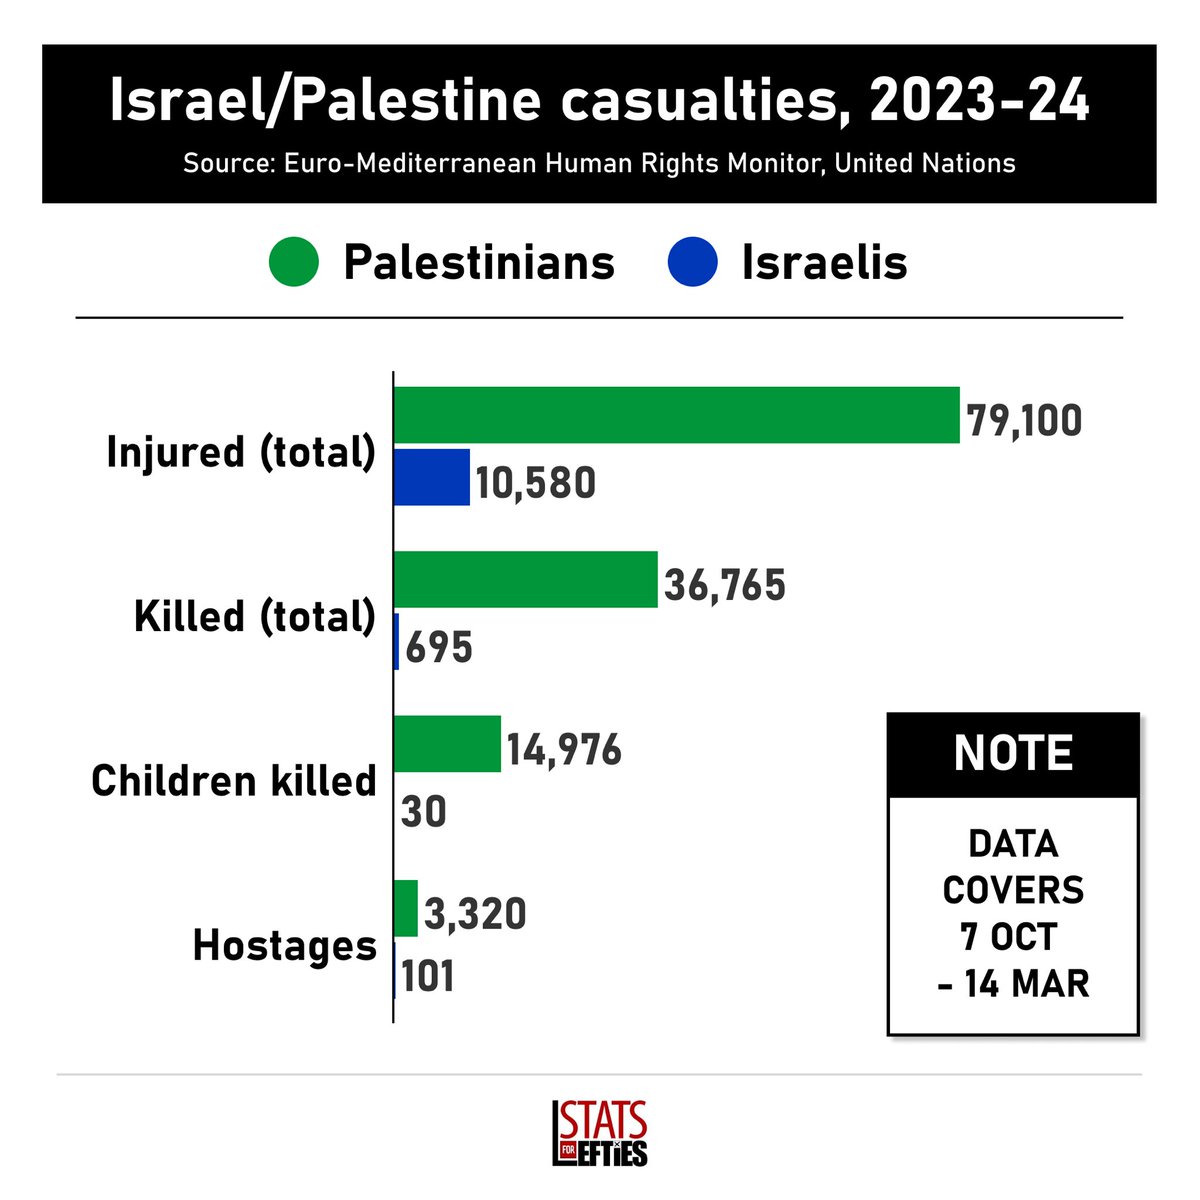 Israel has killed 88 Palestinian children in Gaza per day, every single day, for 6 months straight. 14,976 children killed. In just 170 days. This is a genocide. Plain and simple.